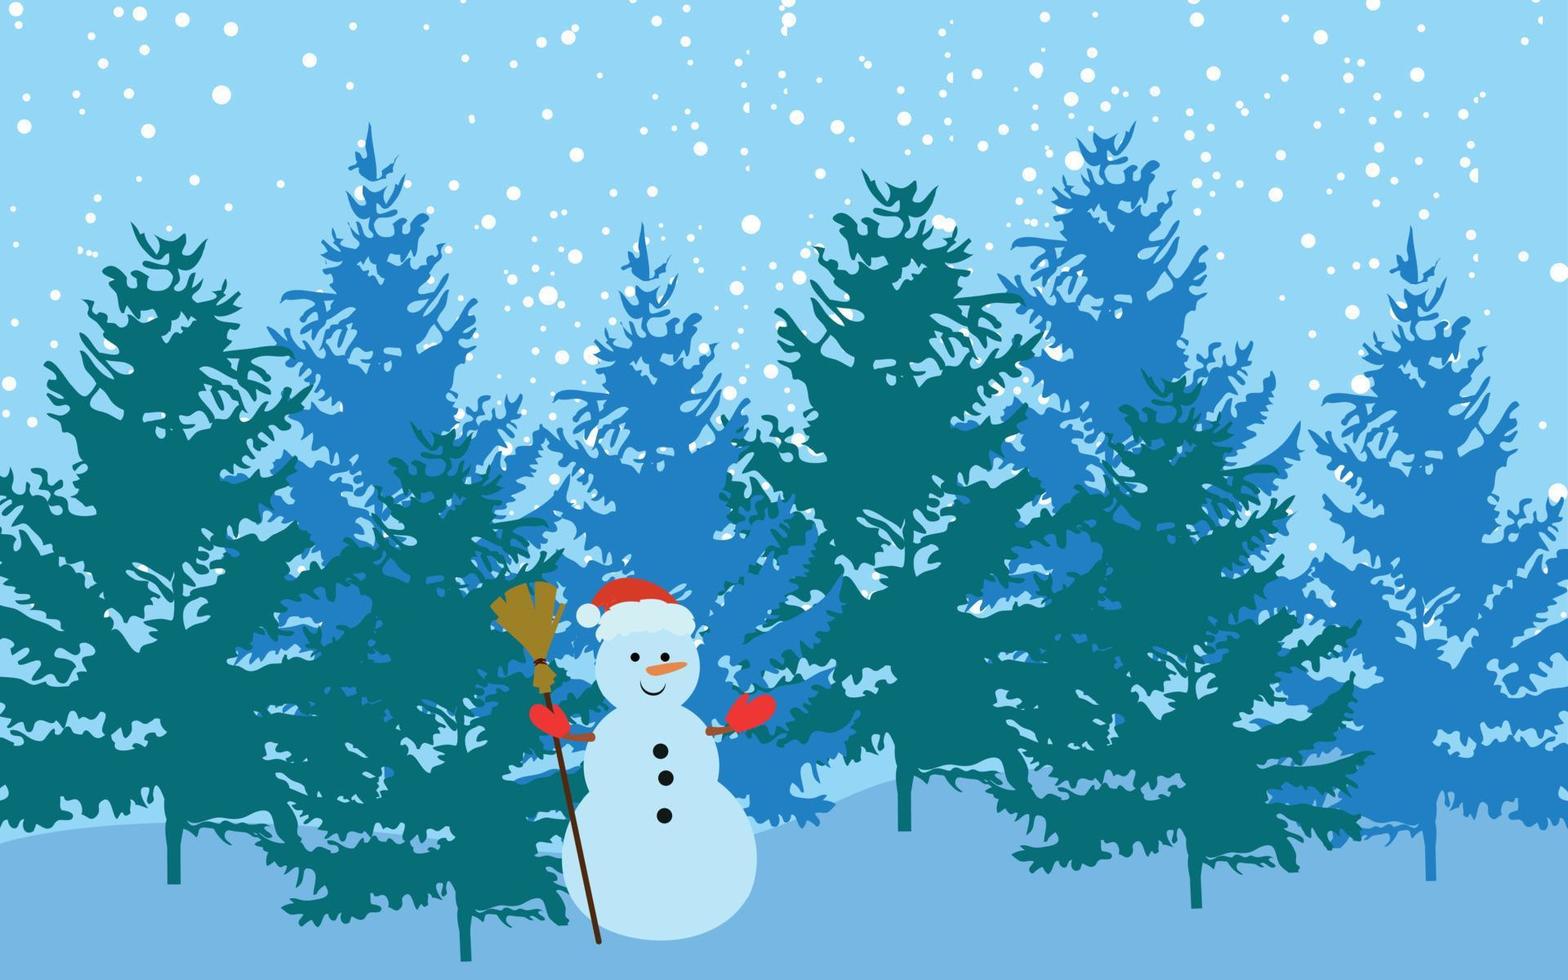 Vector illustration of a winter night forest with a greeting snowman, Christmas snow background